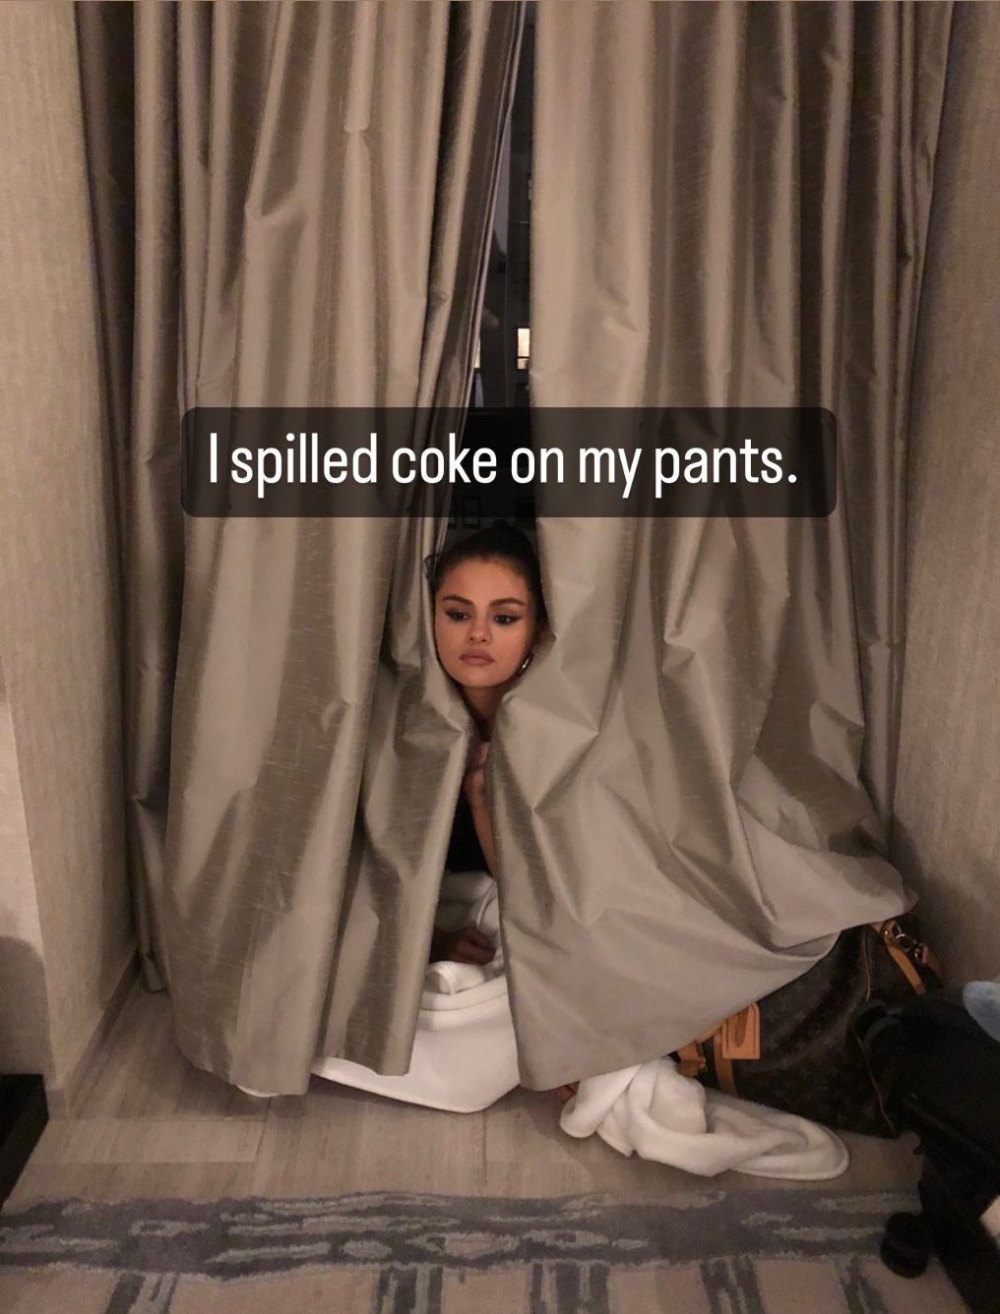 Selena Gomez Hides Behind Curtains After Spilling Coke on My Pants